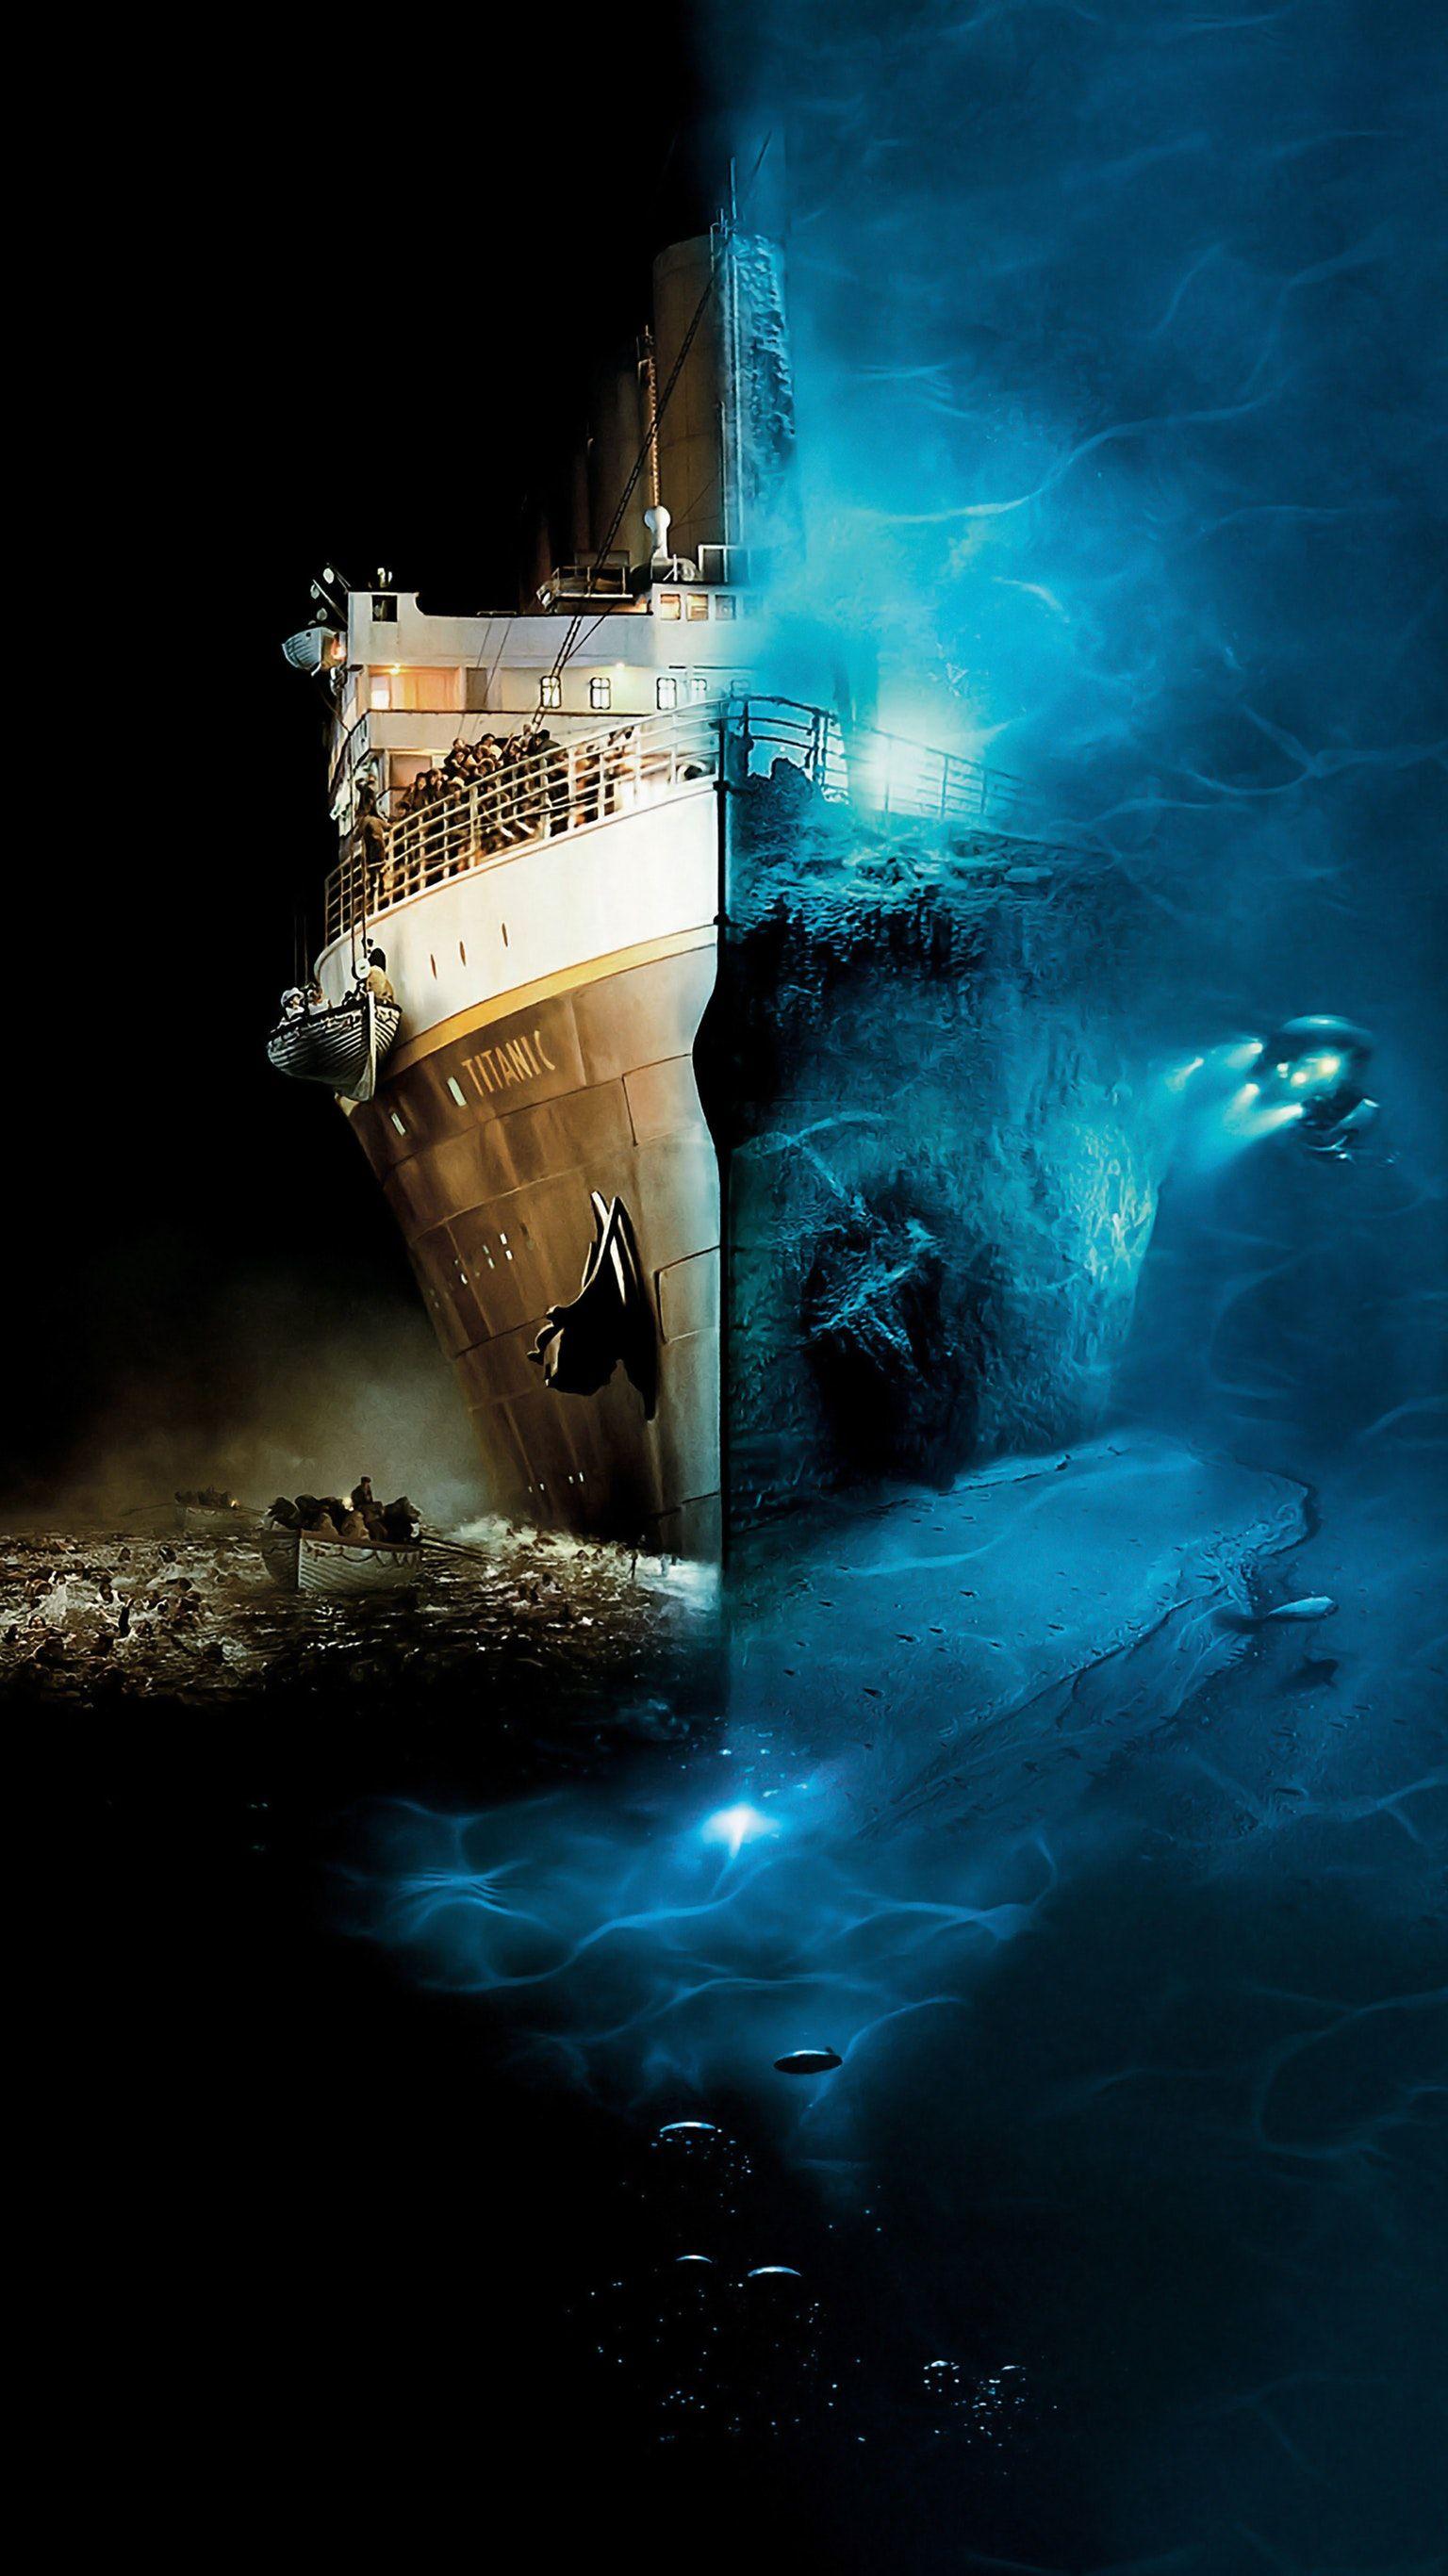 Titanic for iphone download